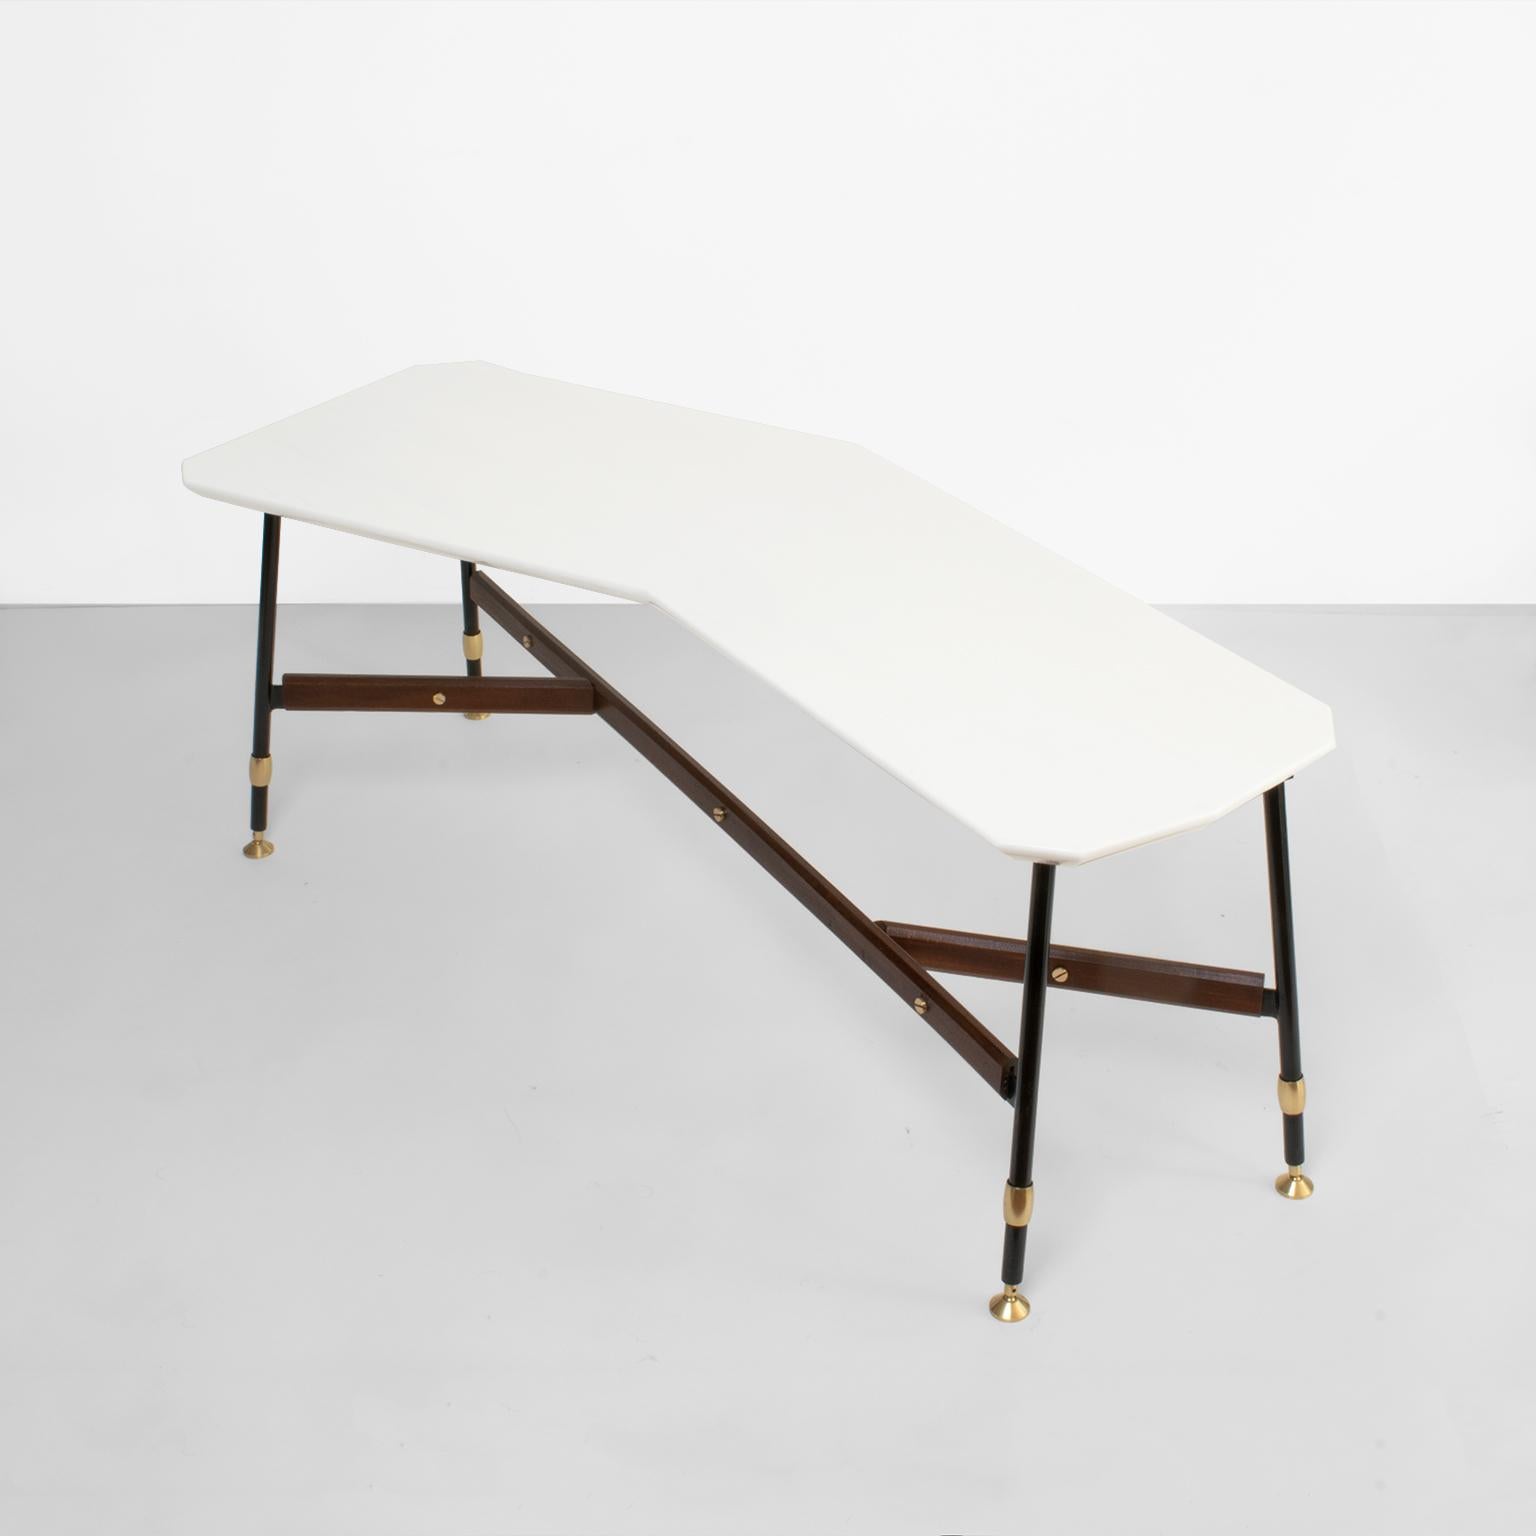 An elegant Mid-Century Modern Italian coffee table with a polished white marble top with 11 angles and a reverse bevel edge. A lacquered metal base with polished brass feet and screws accent a the teak wood brace. Newly restored in excellent